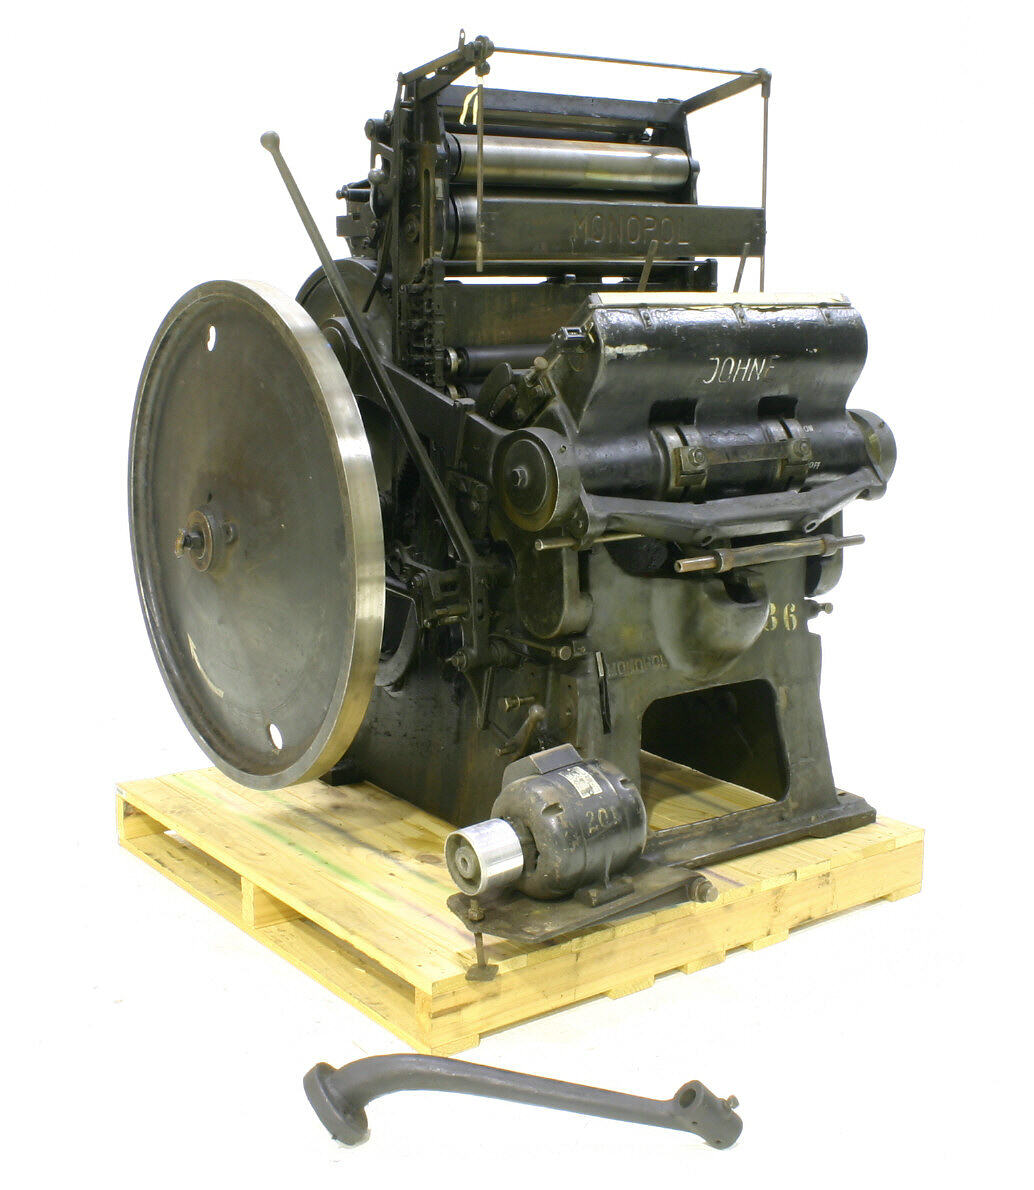 Treadle-operated 'Minerva' platen printing press made by H. S. Cropper and  Co.